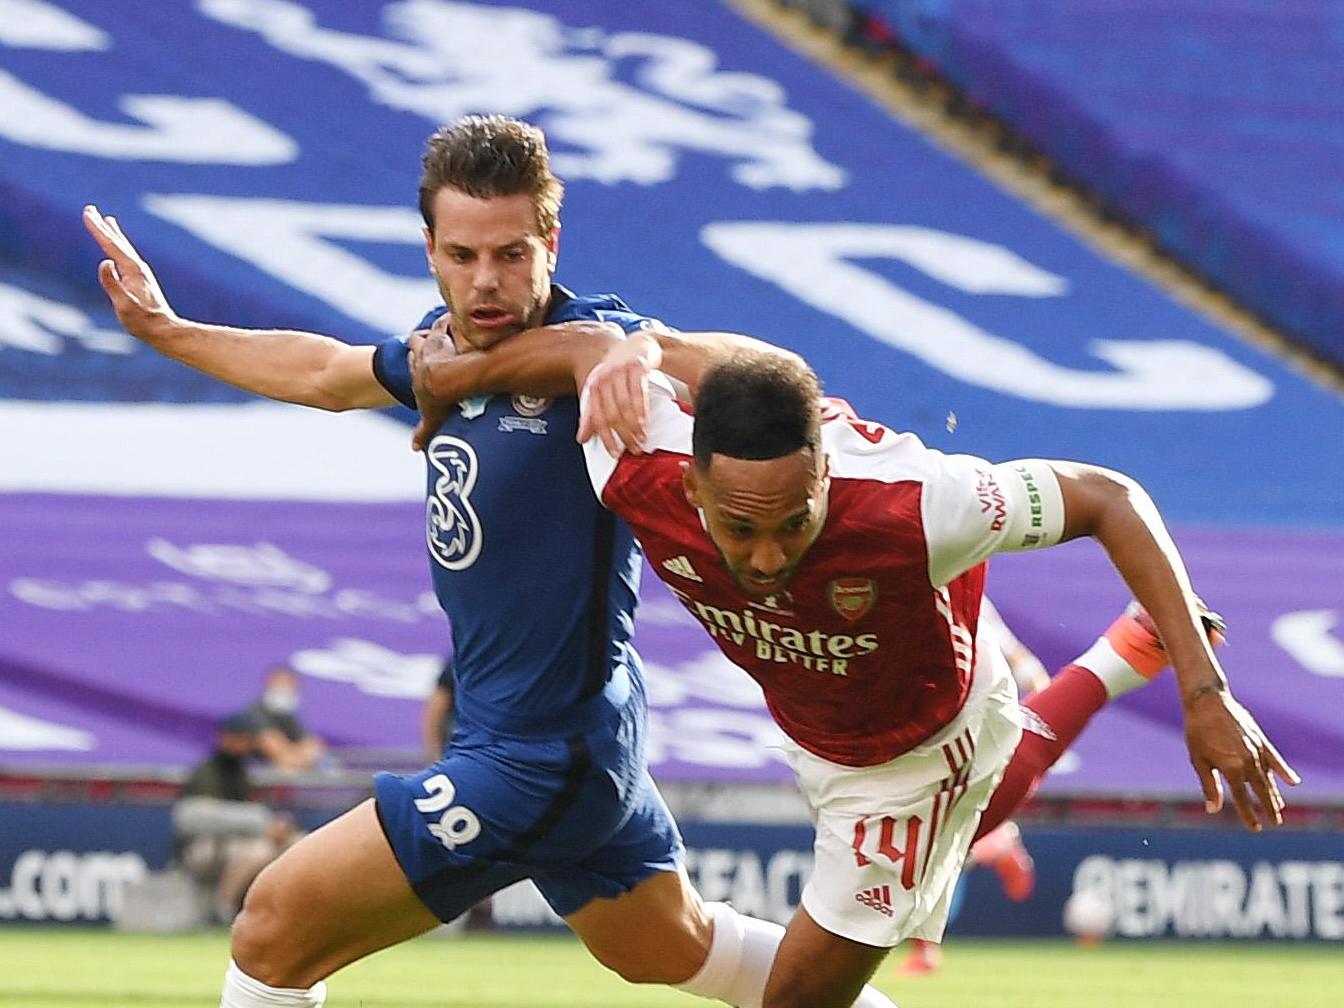 Arsenal Vs Chelsea Result Player Ratings As Gunners Emerge Victorious From Dramatic Fa Cup Final The Independent The Independent arsenal vs chelsea result player